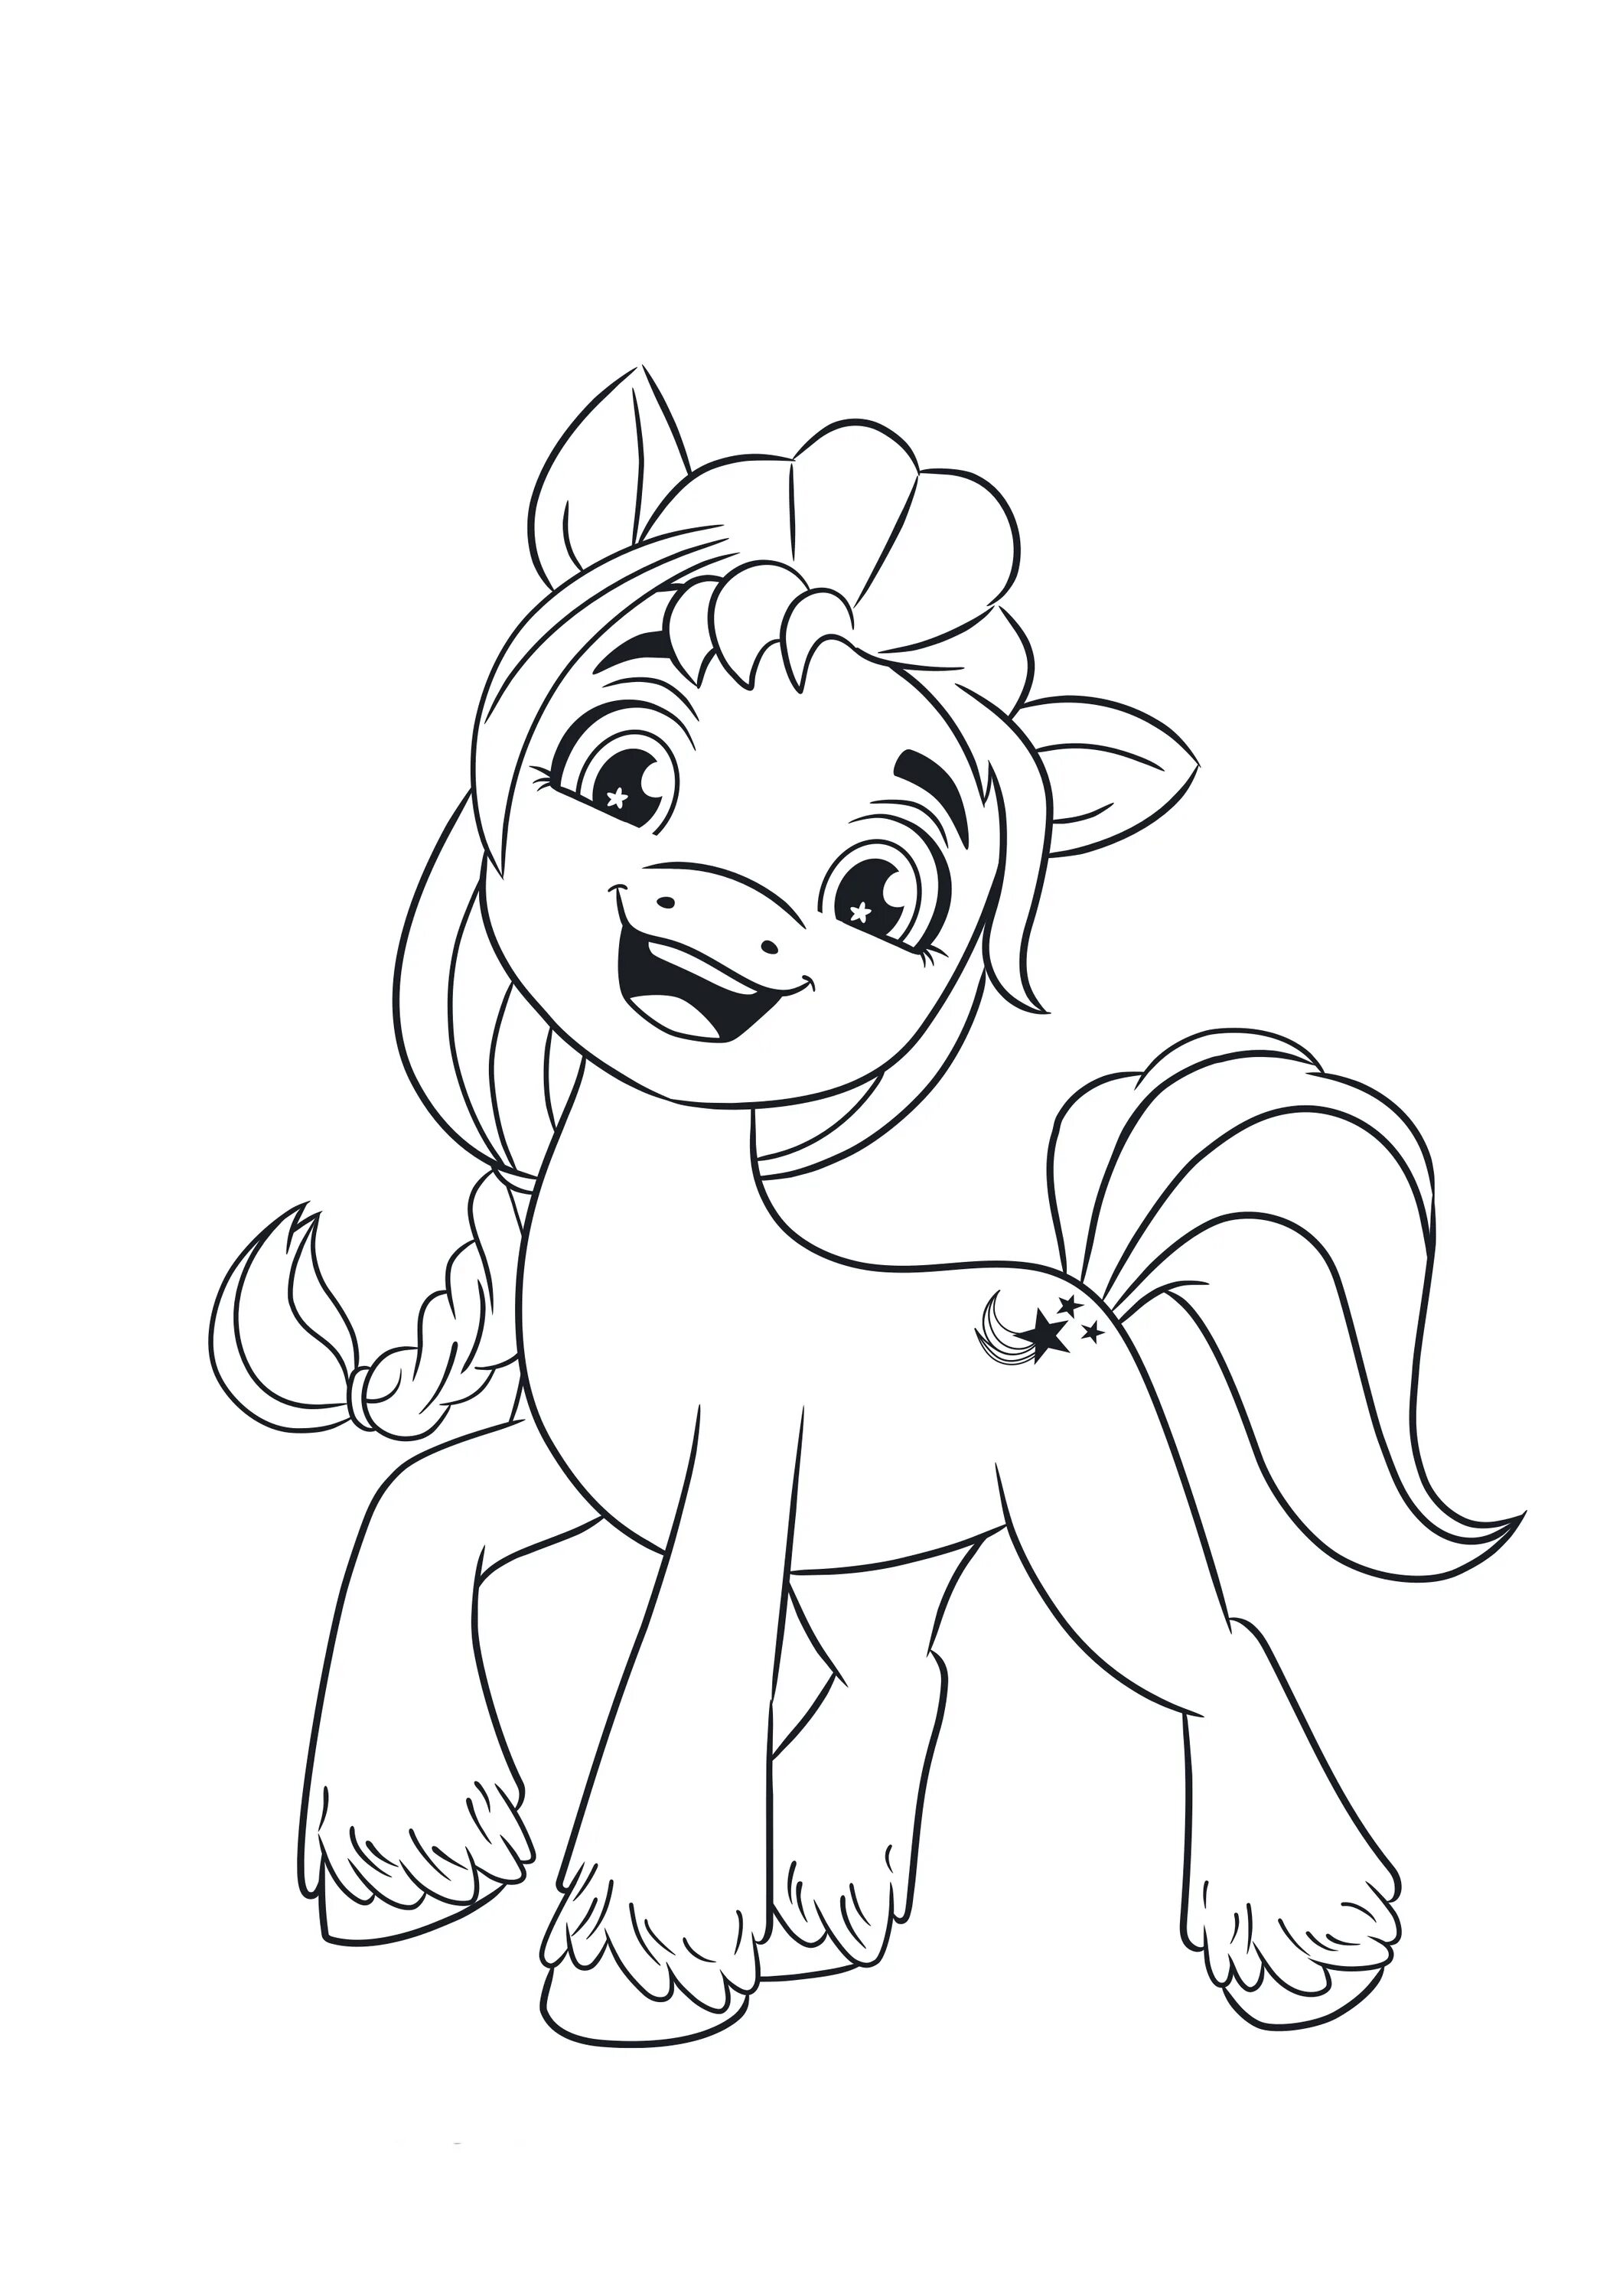 Coloring page glamor pip pony